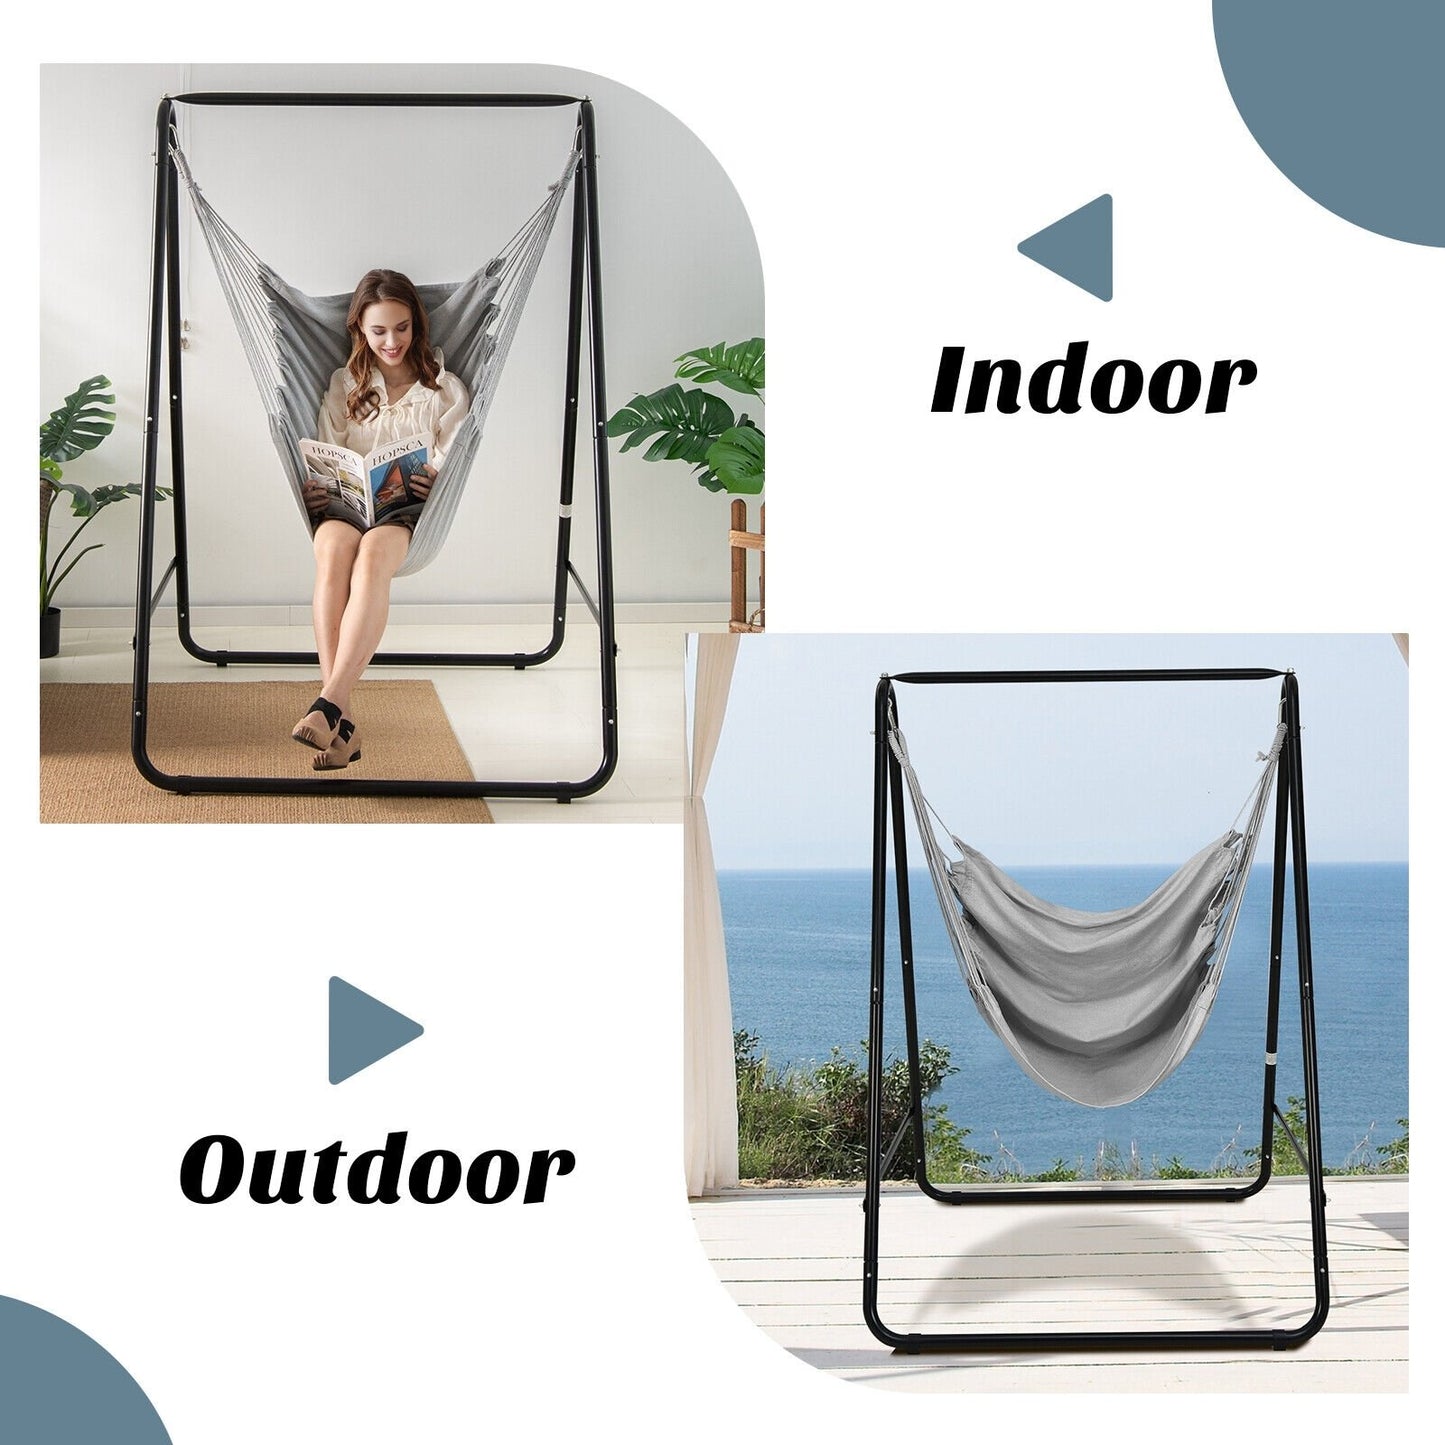 Hanging Padded Hammock Chair with Stand and Heavy Duty Steel, Gray